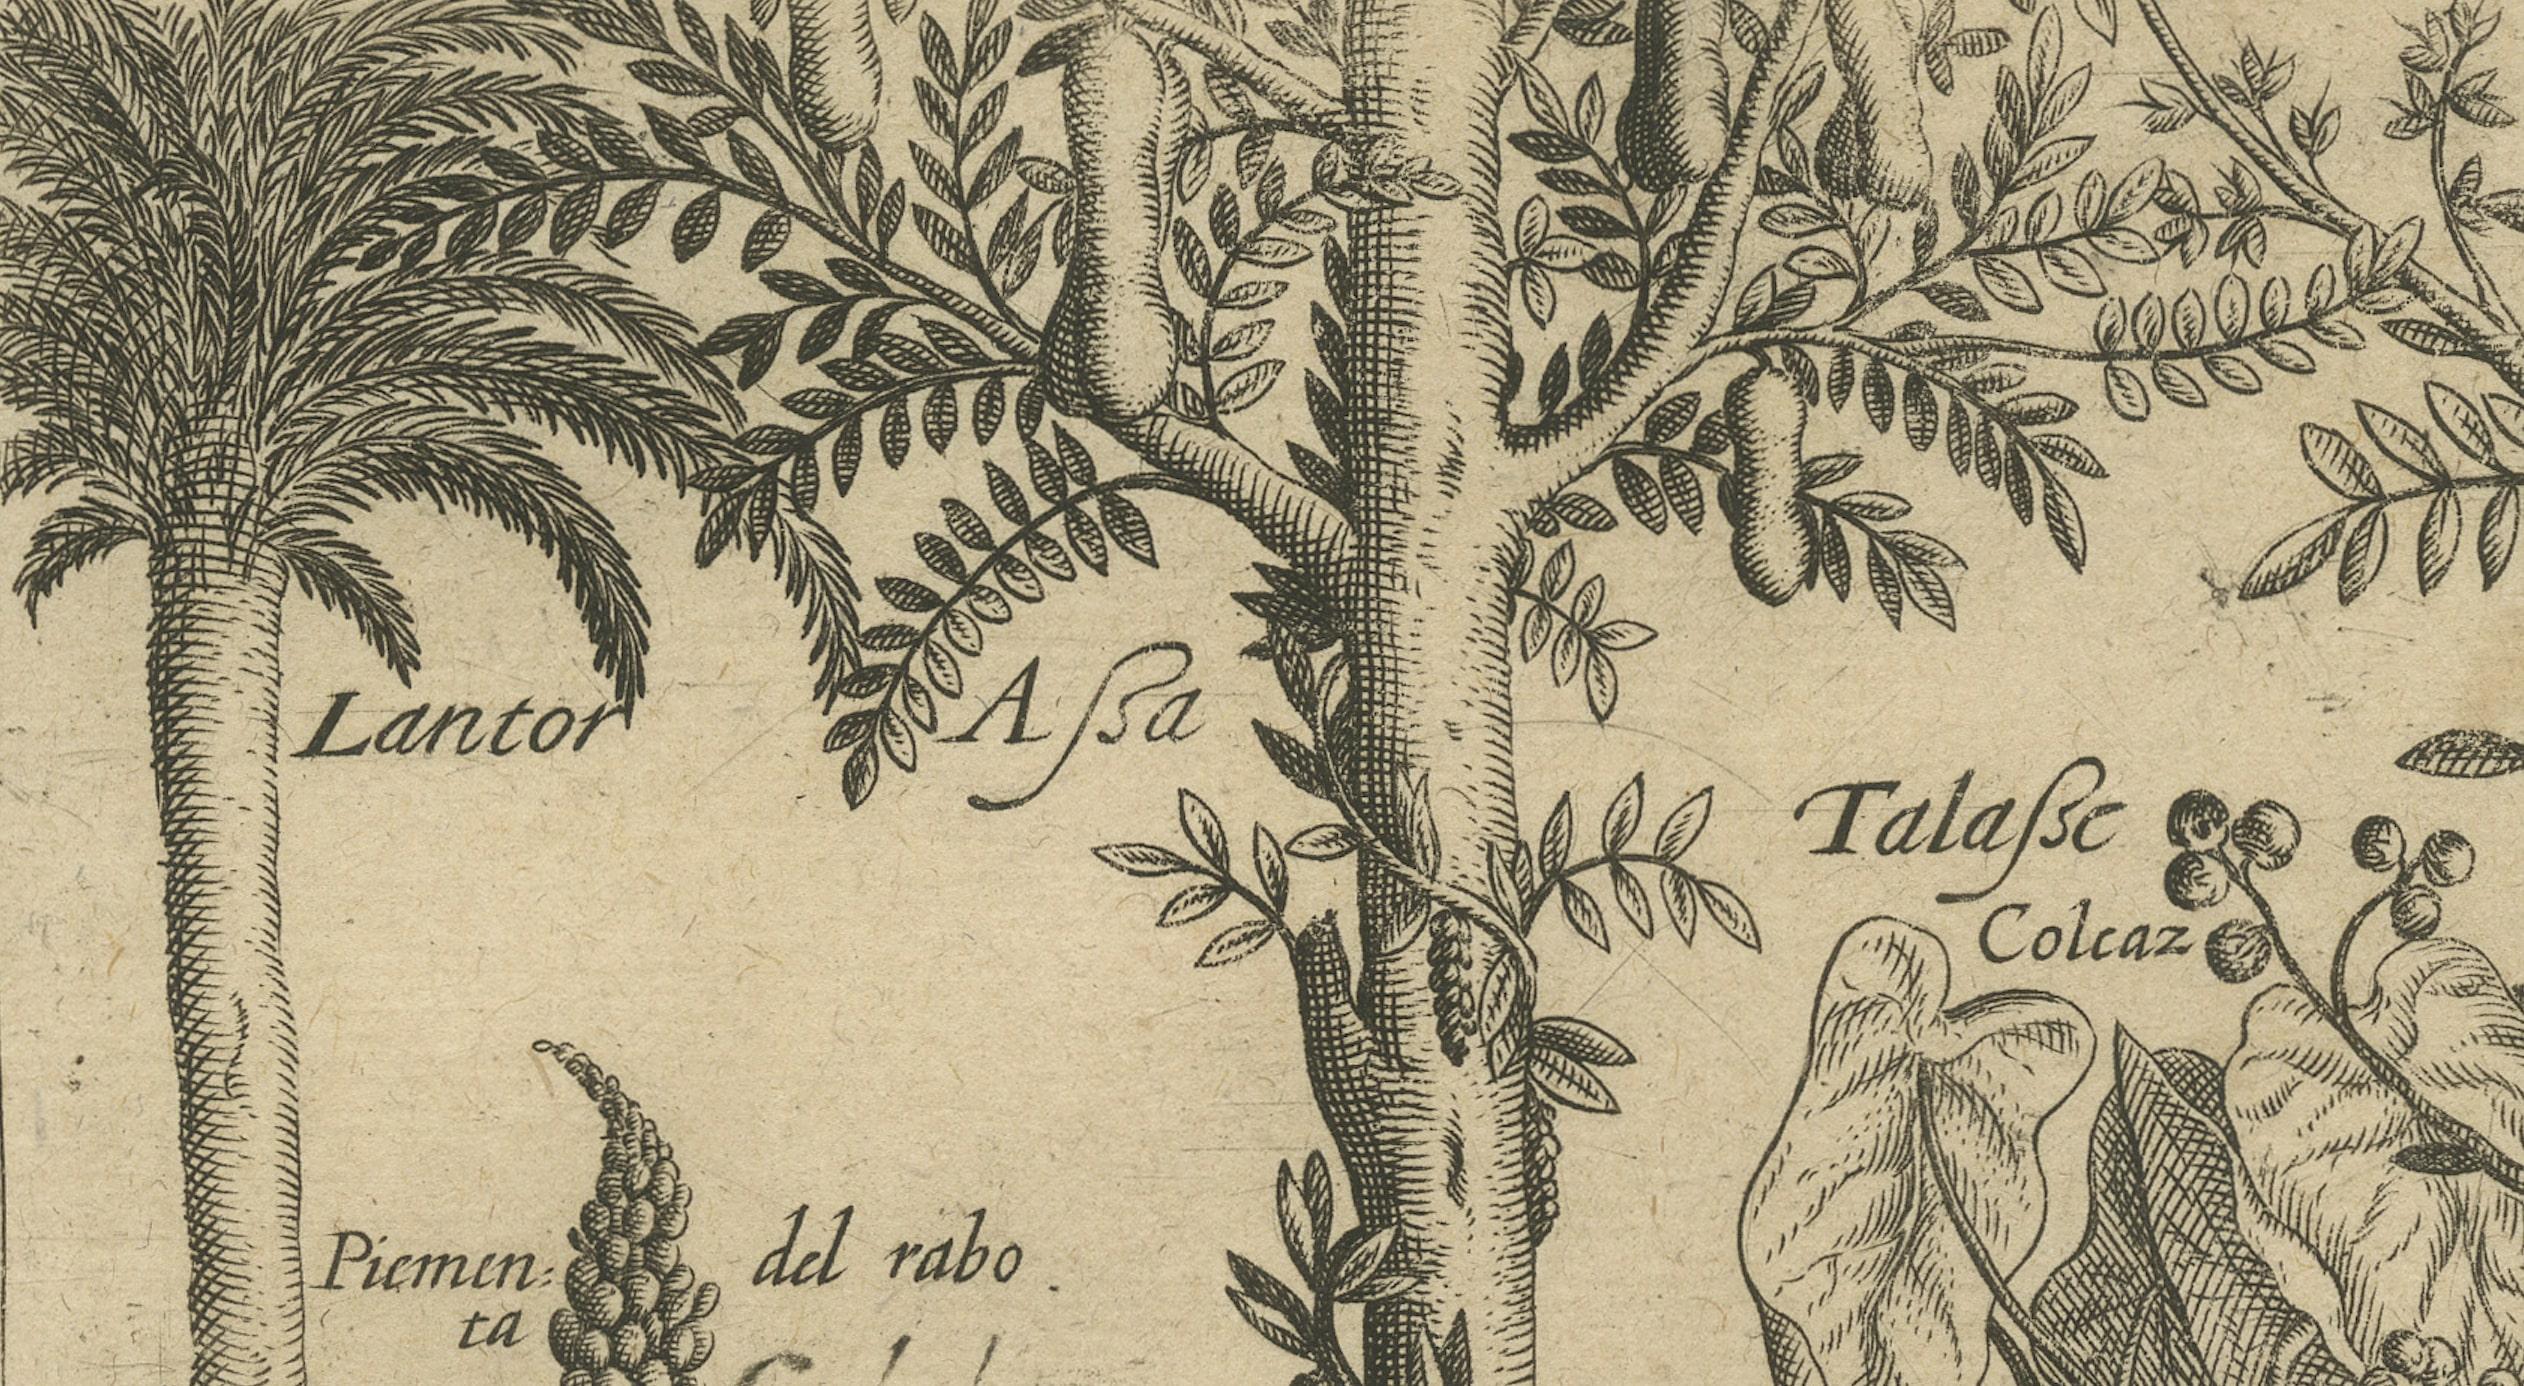 Paper Verdant Wonders: Exotic Trees and Spices of India in De Bry's 1601 Illustration For Sale